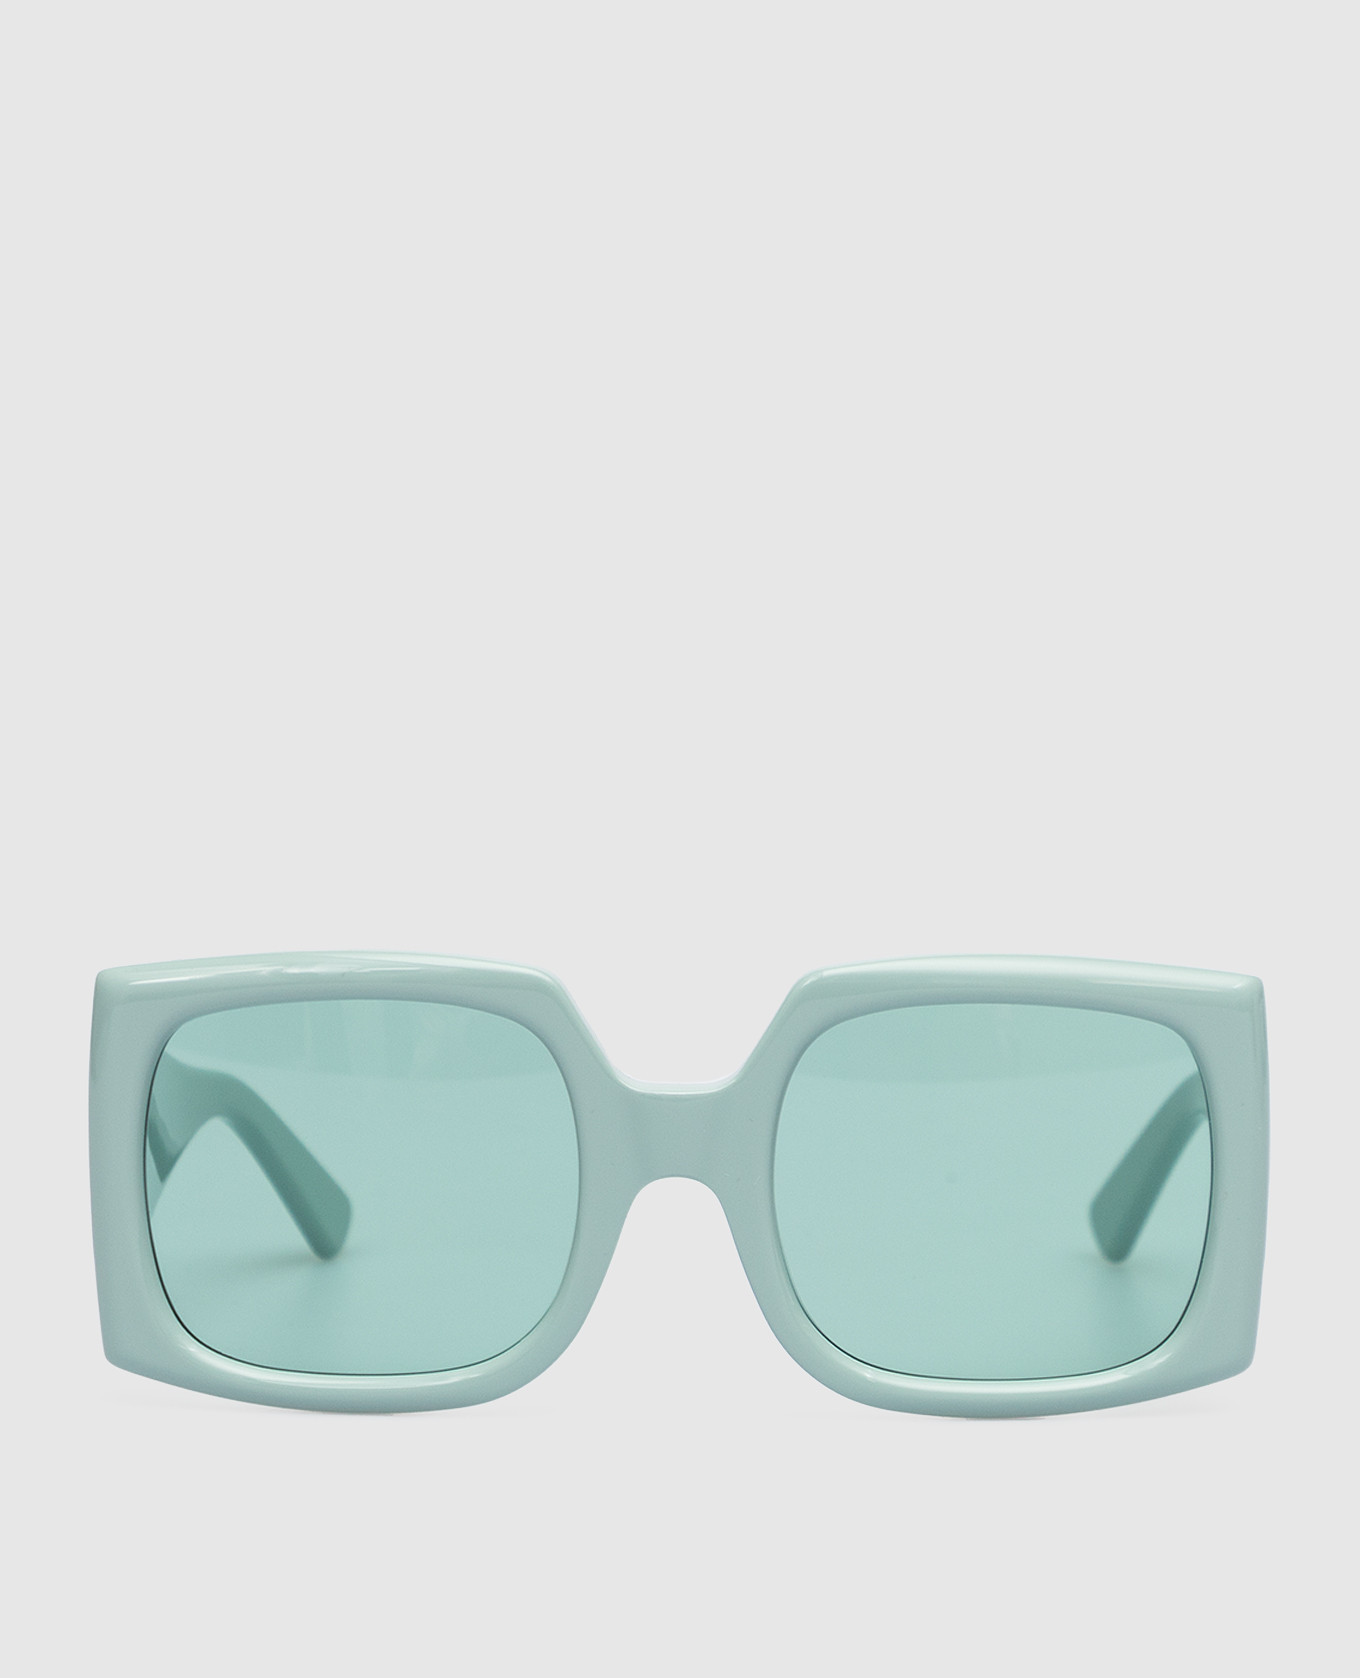 Fhonix green sunglasses with textured logo